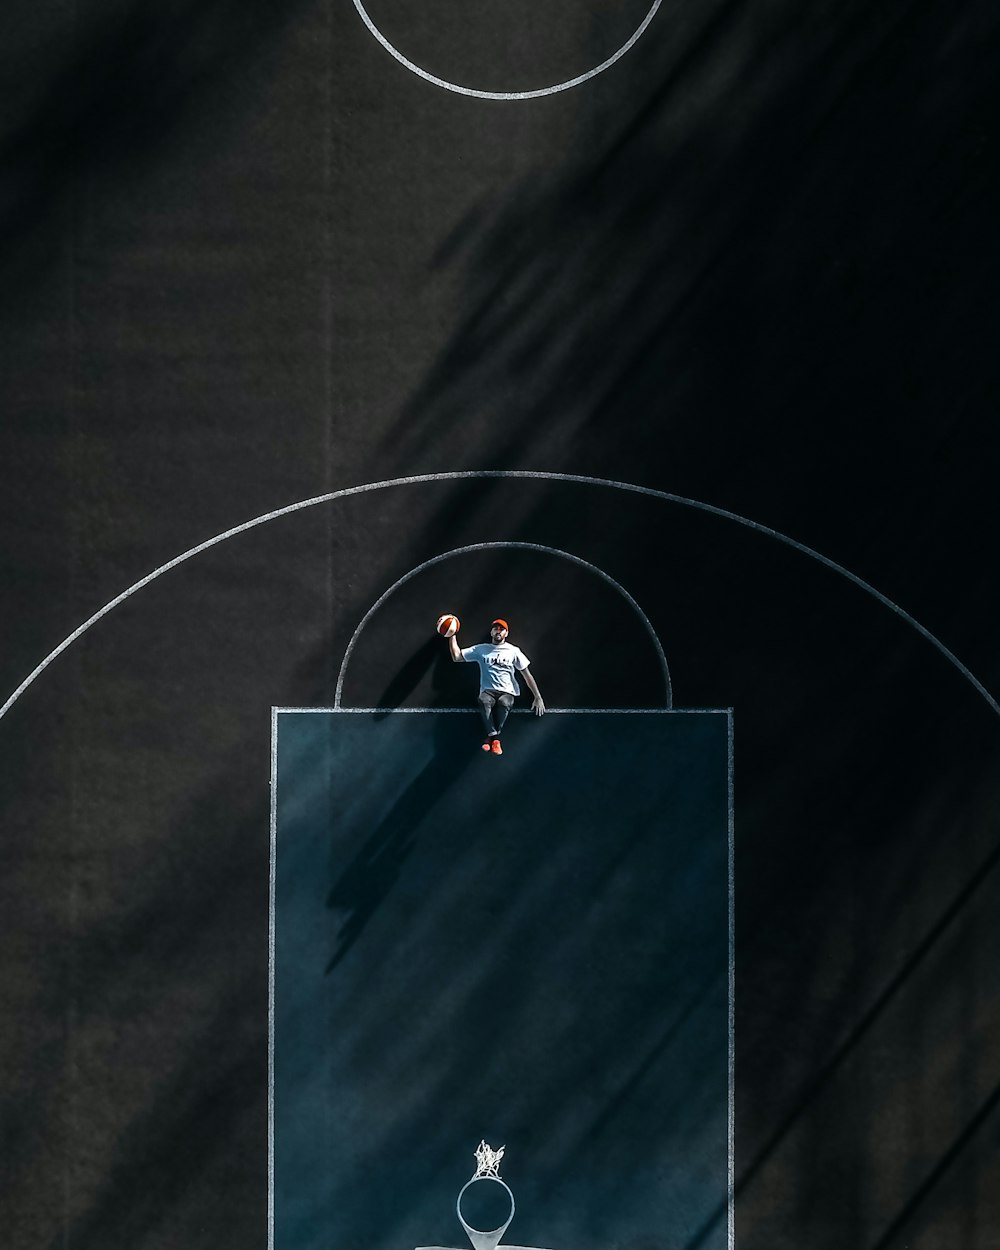 person in white t-shirt lying on basketball court